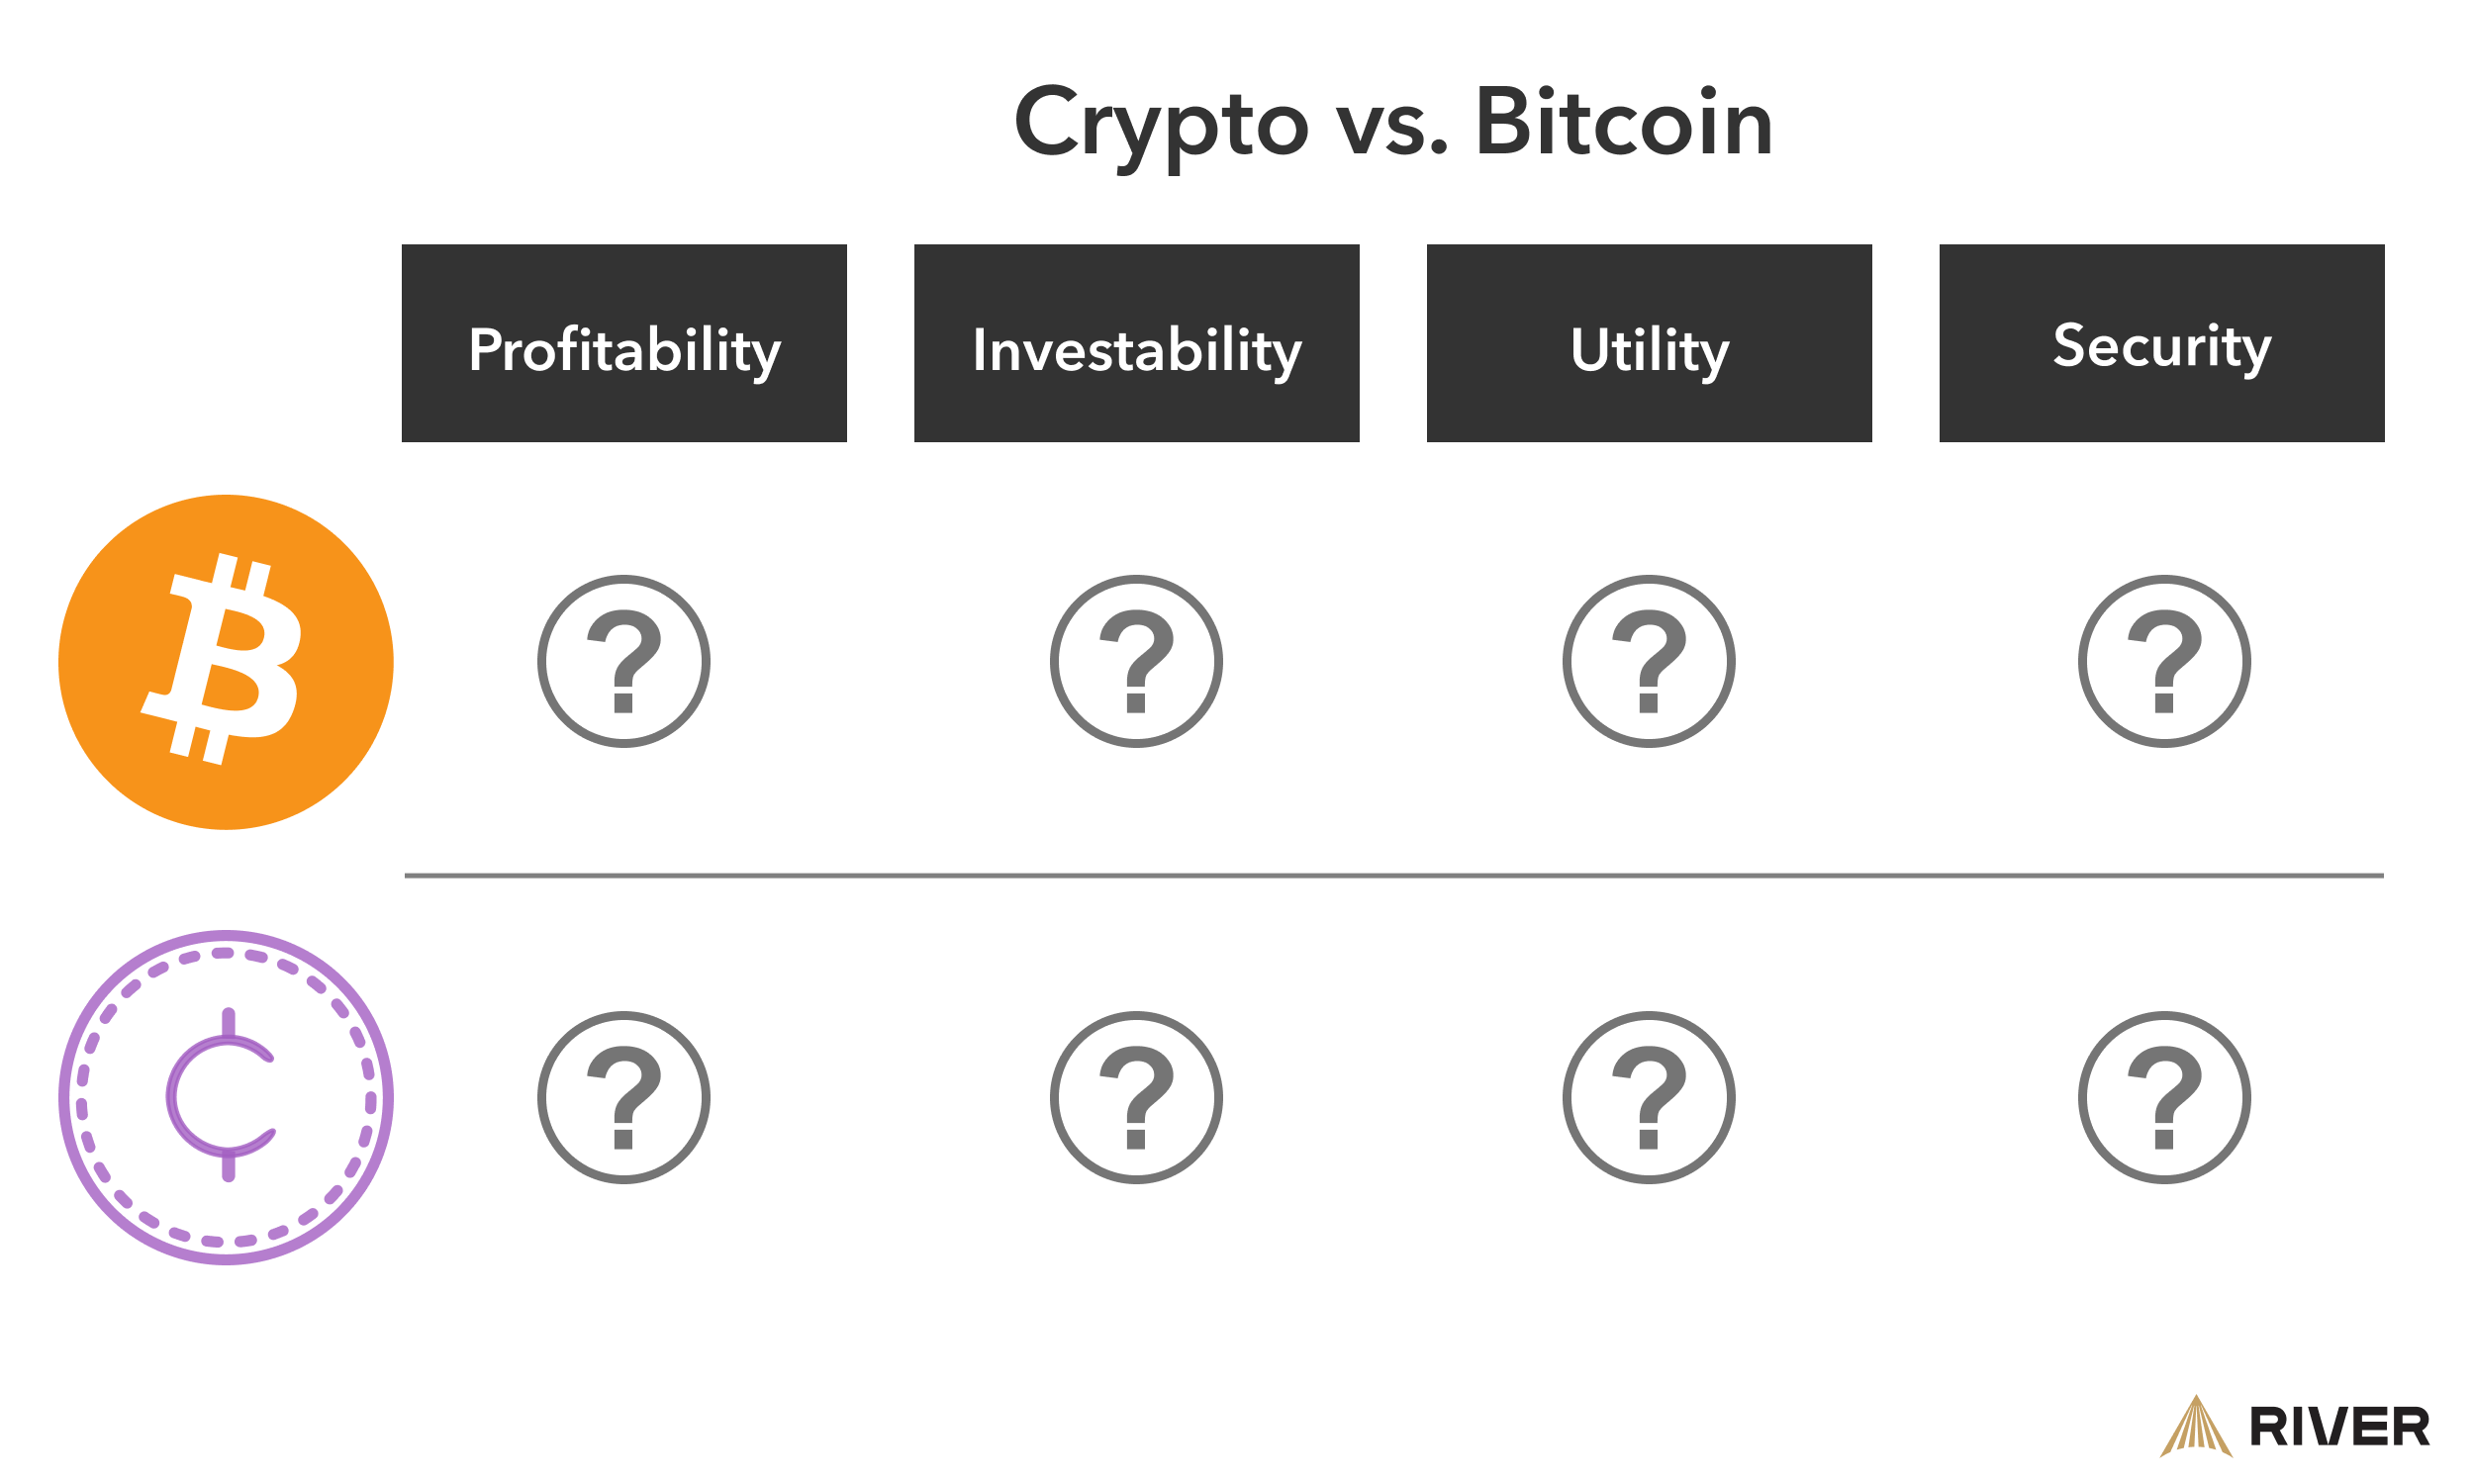 Initial Crypto vs Bitcoin comparison graphic with question mark icons